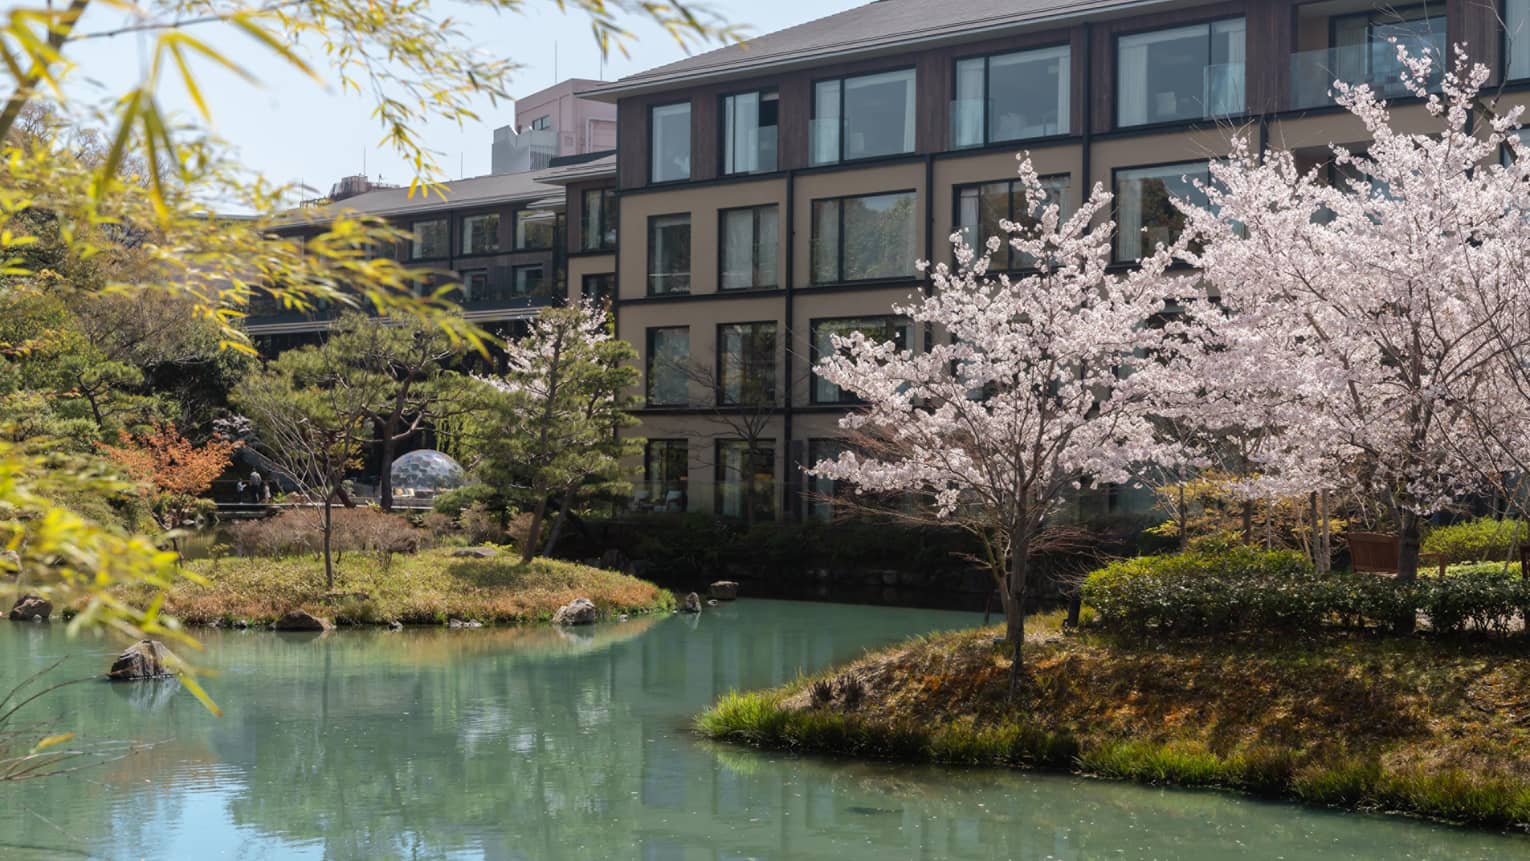 A hotel and pond with cherry blossom trees